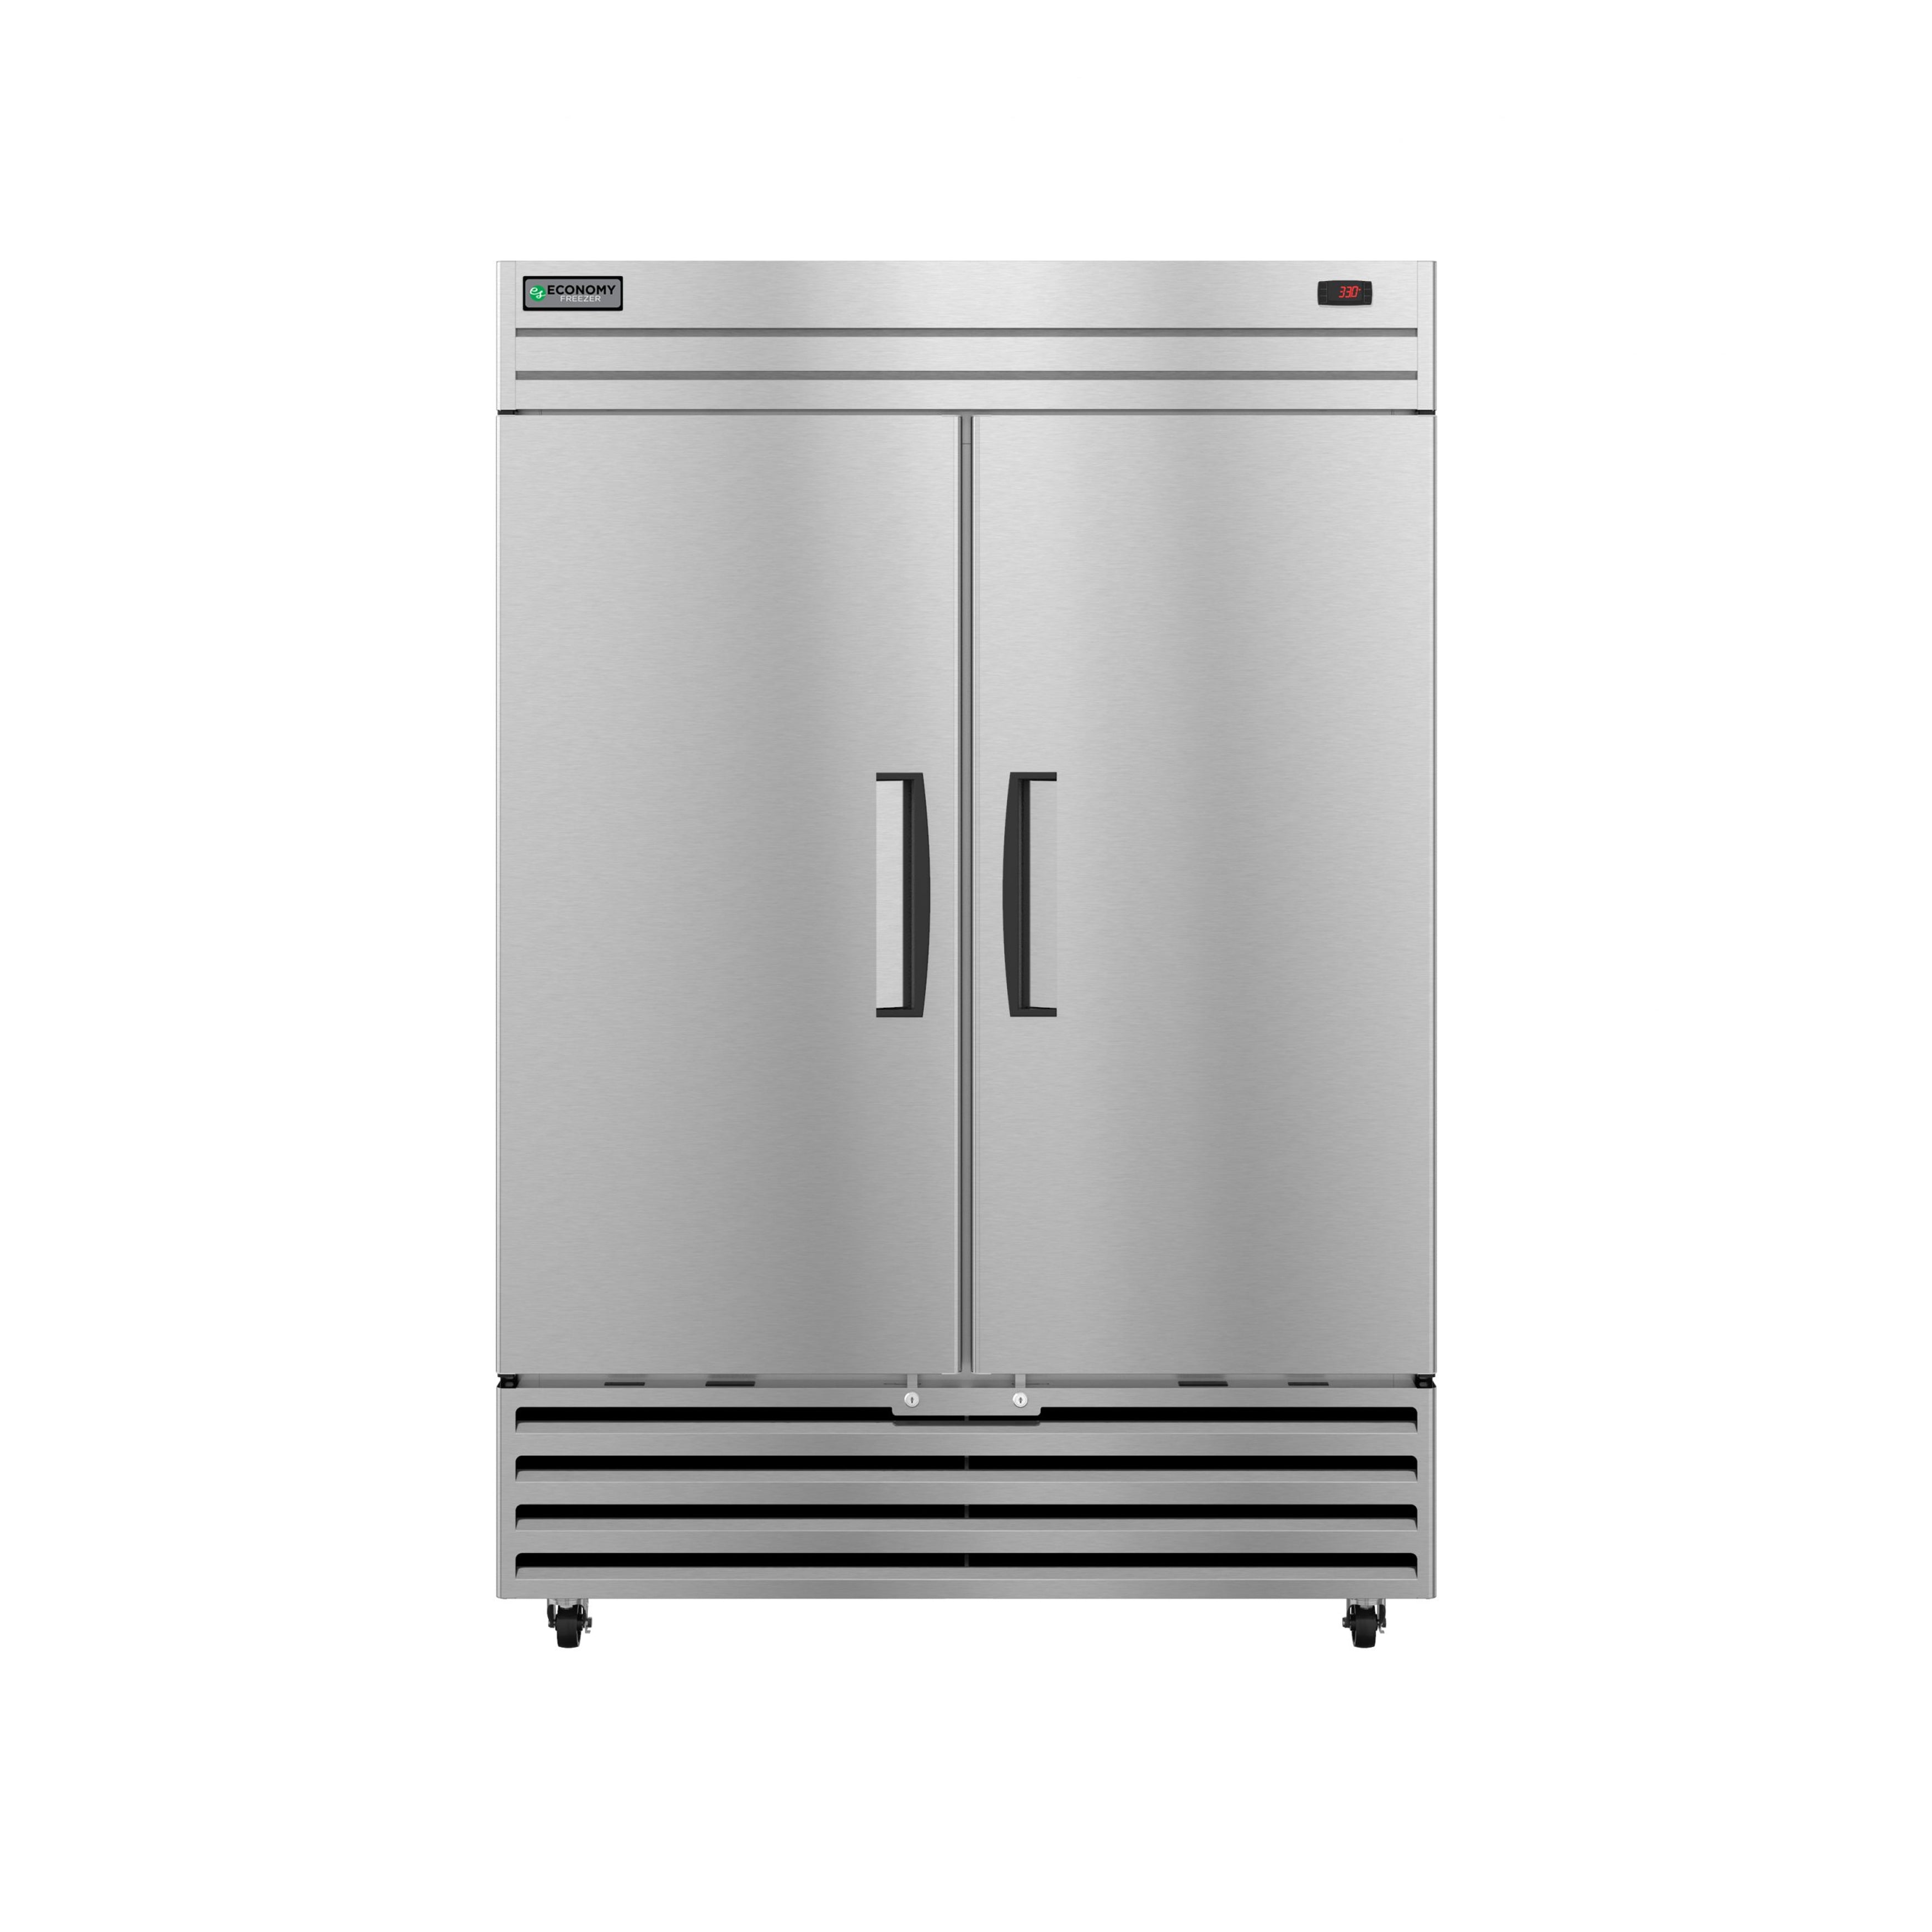 Hoshizaki - EF2A-FS, Commercial 55" Freezer, 2 Section Upright Full Stainless Doors with Lock